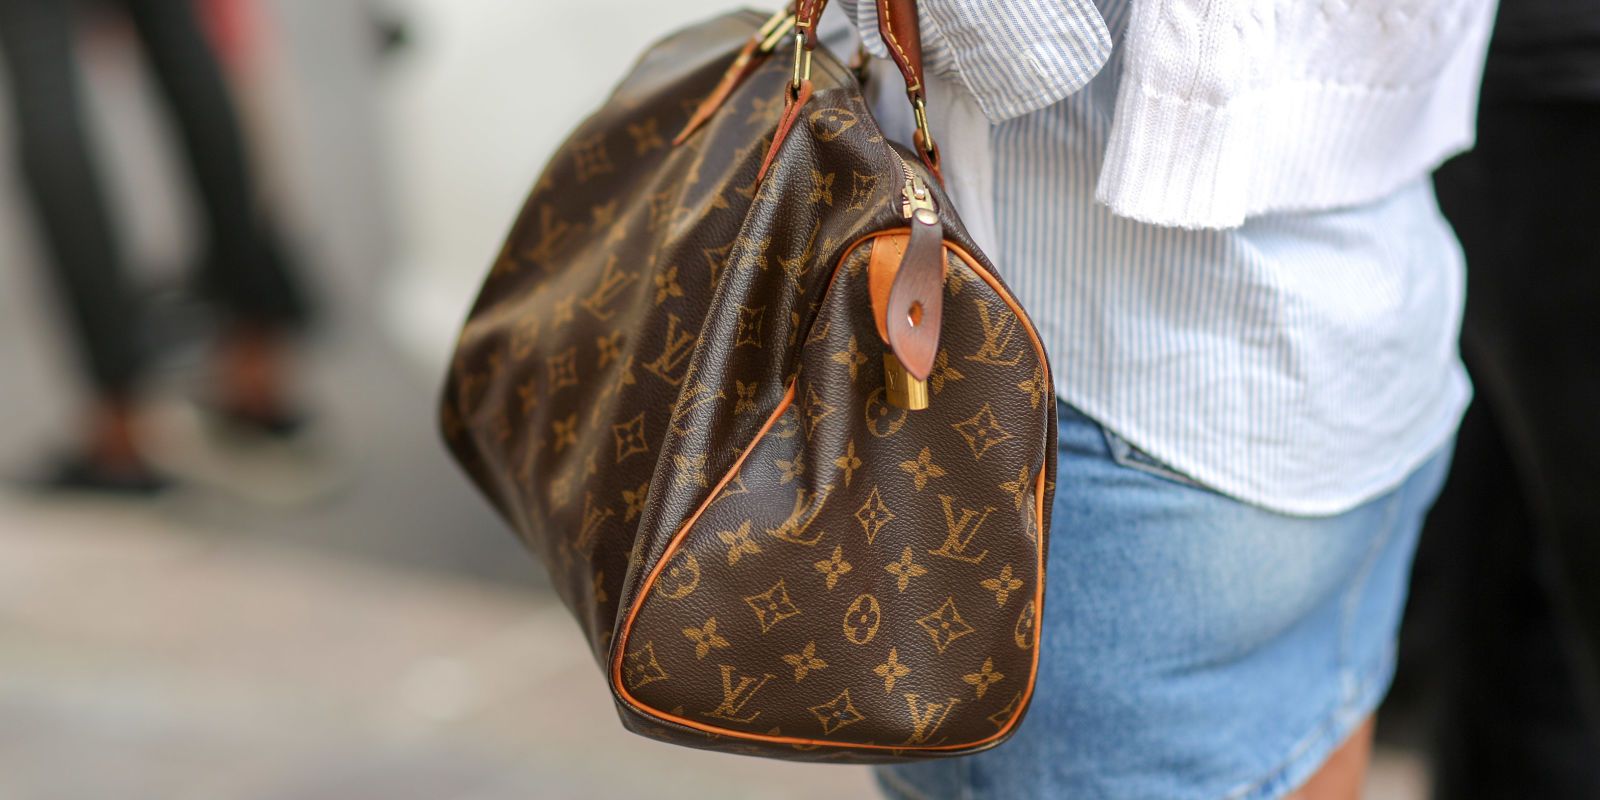 ONE HUNDRED YEARS OF THE VUITTON MONOGRAM FABRIC News Photo - Getty Images